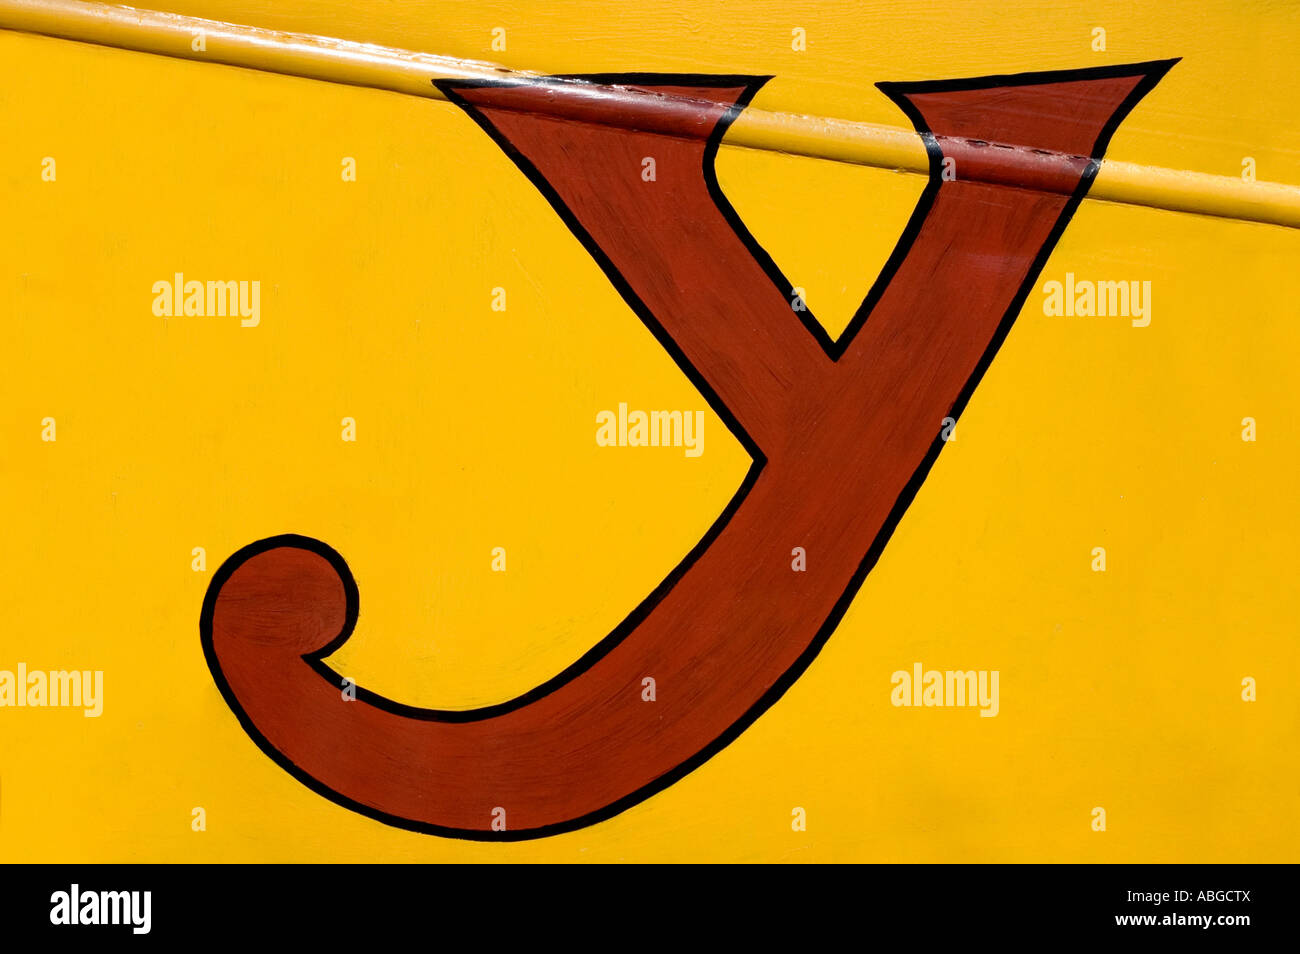 ALPHABET LETTER Y ON YELLOW BACKGROUND Stock Photo